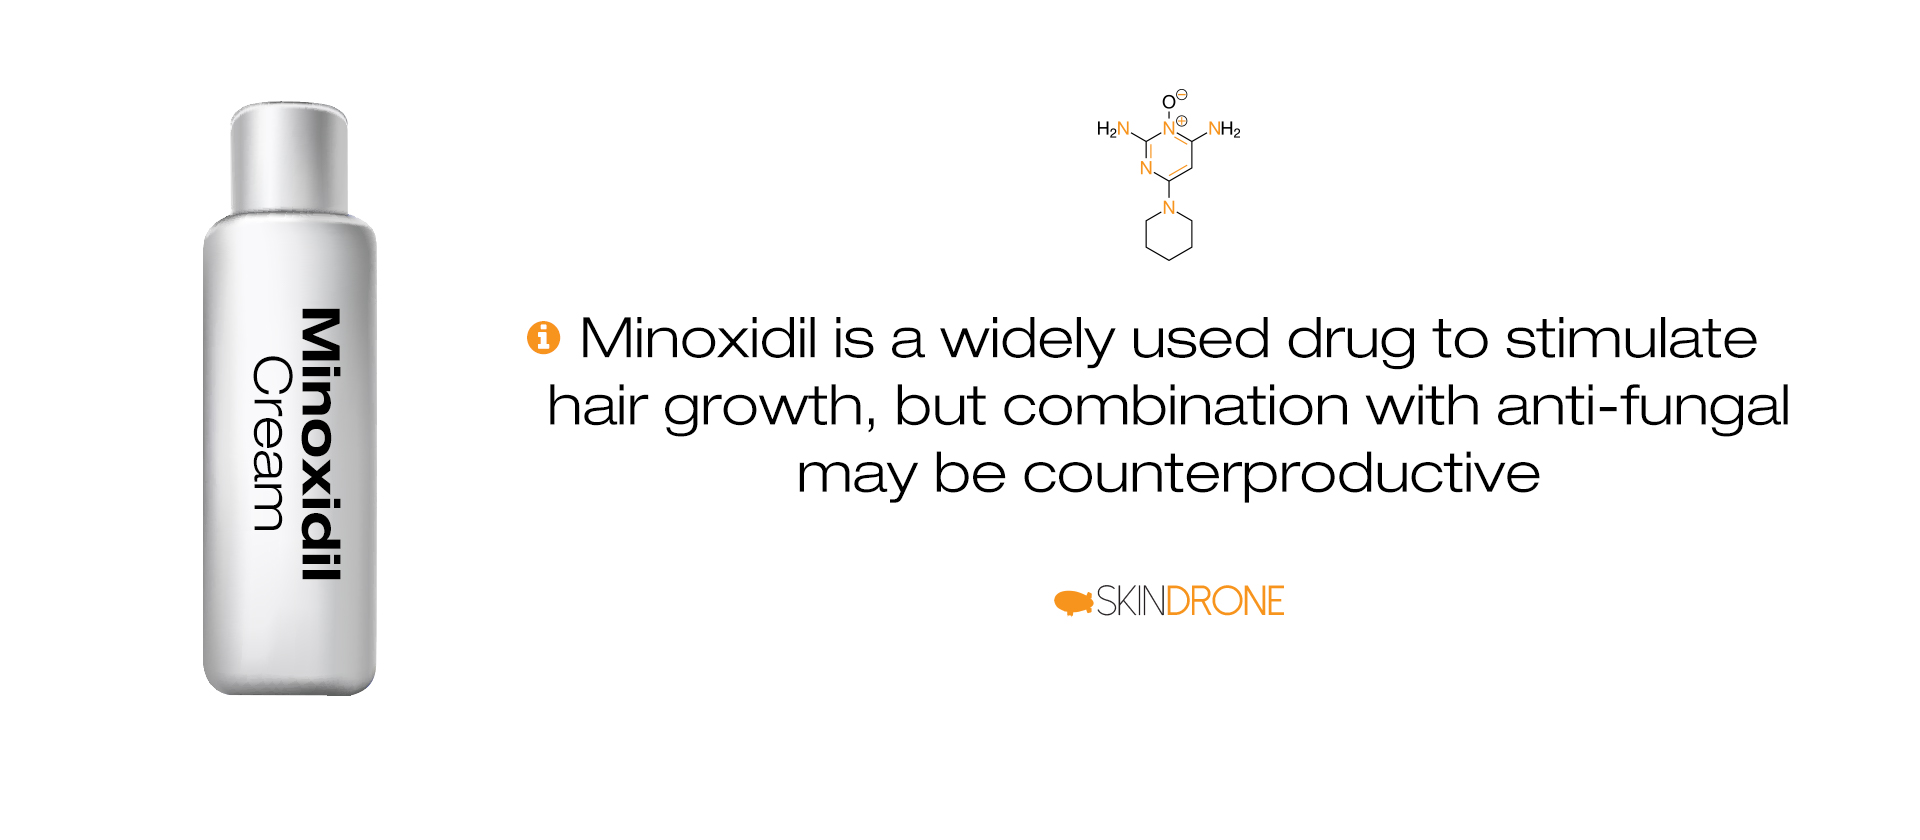 Minoxidil is a widely used drug to stimulate hair growth, but combination with an anti-fungal does not appear necessary